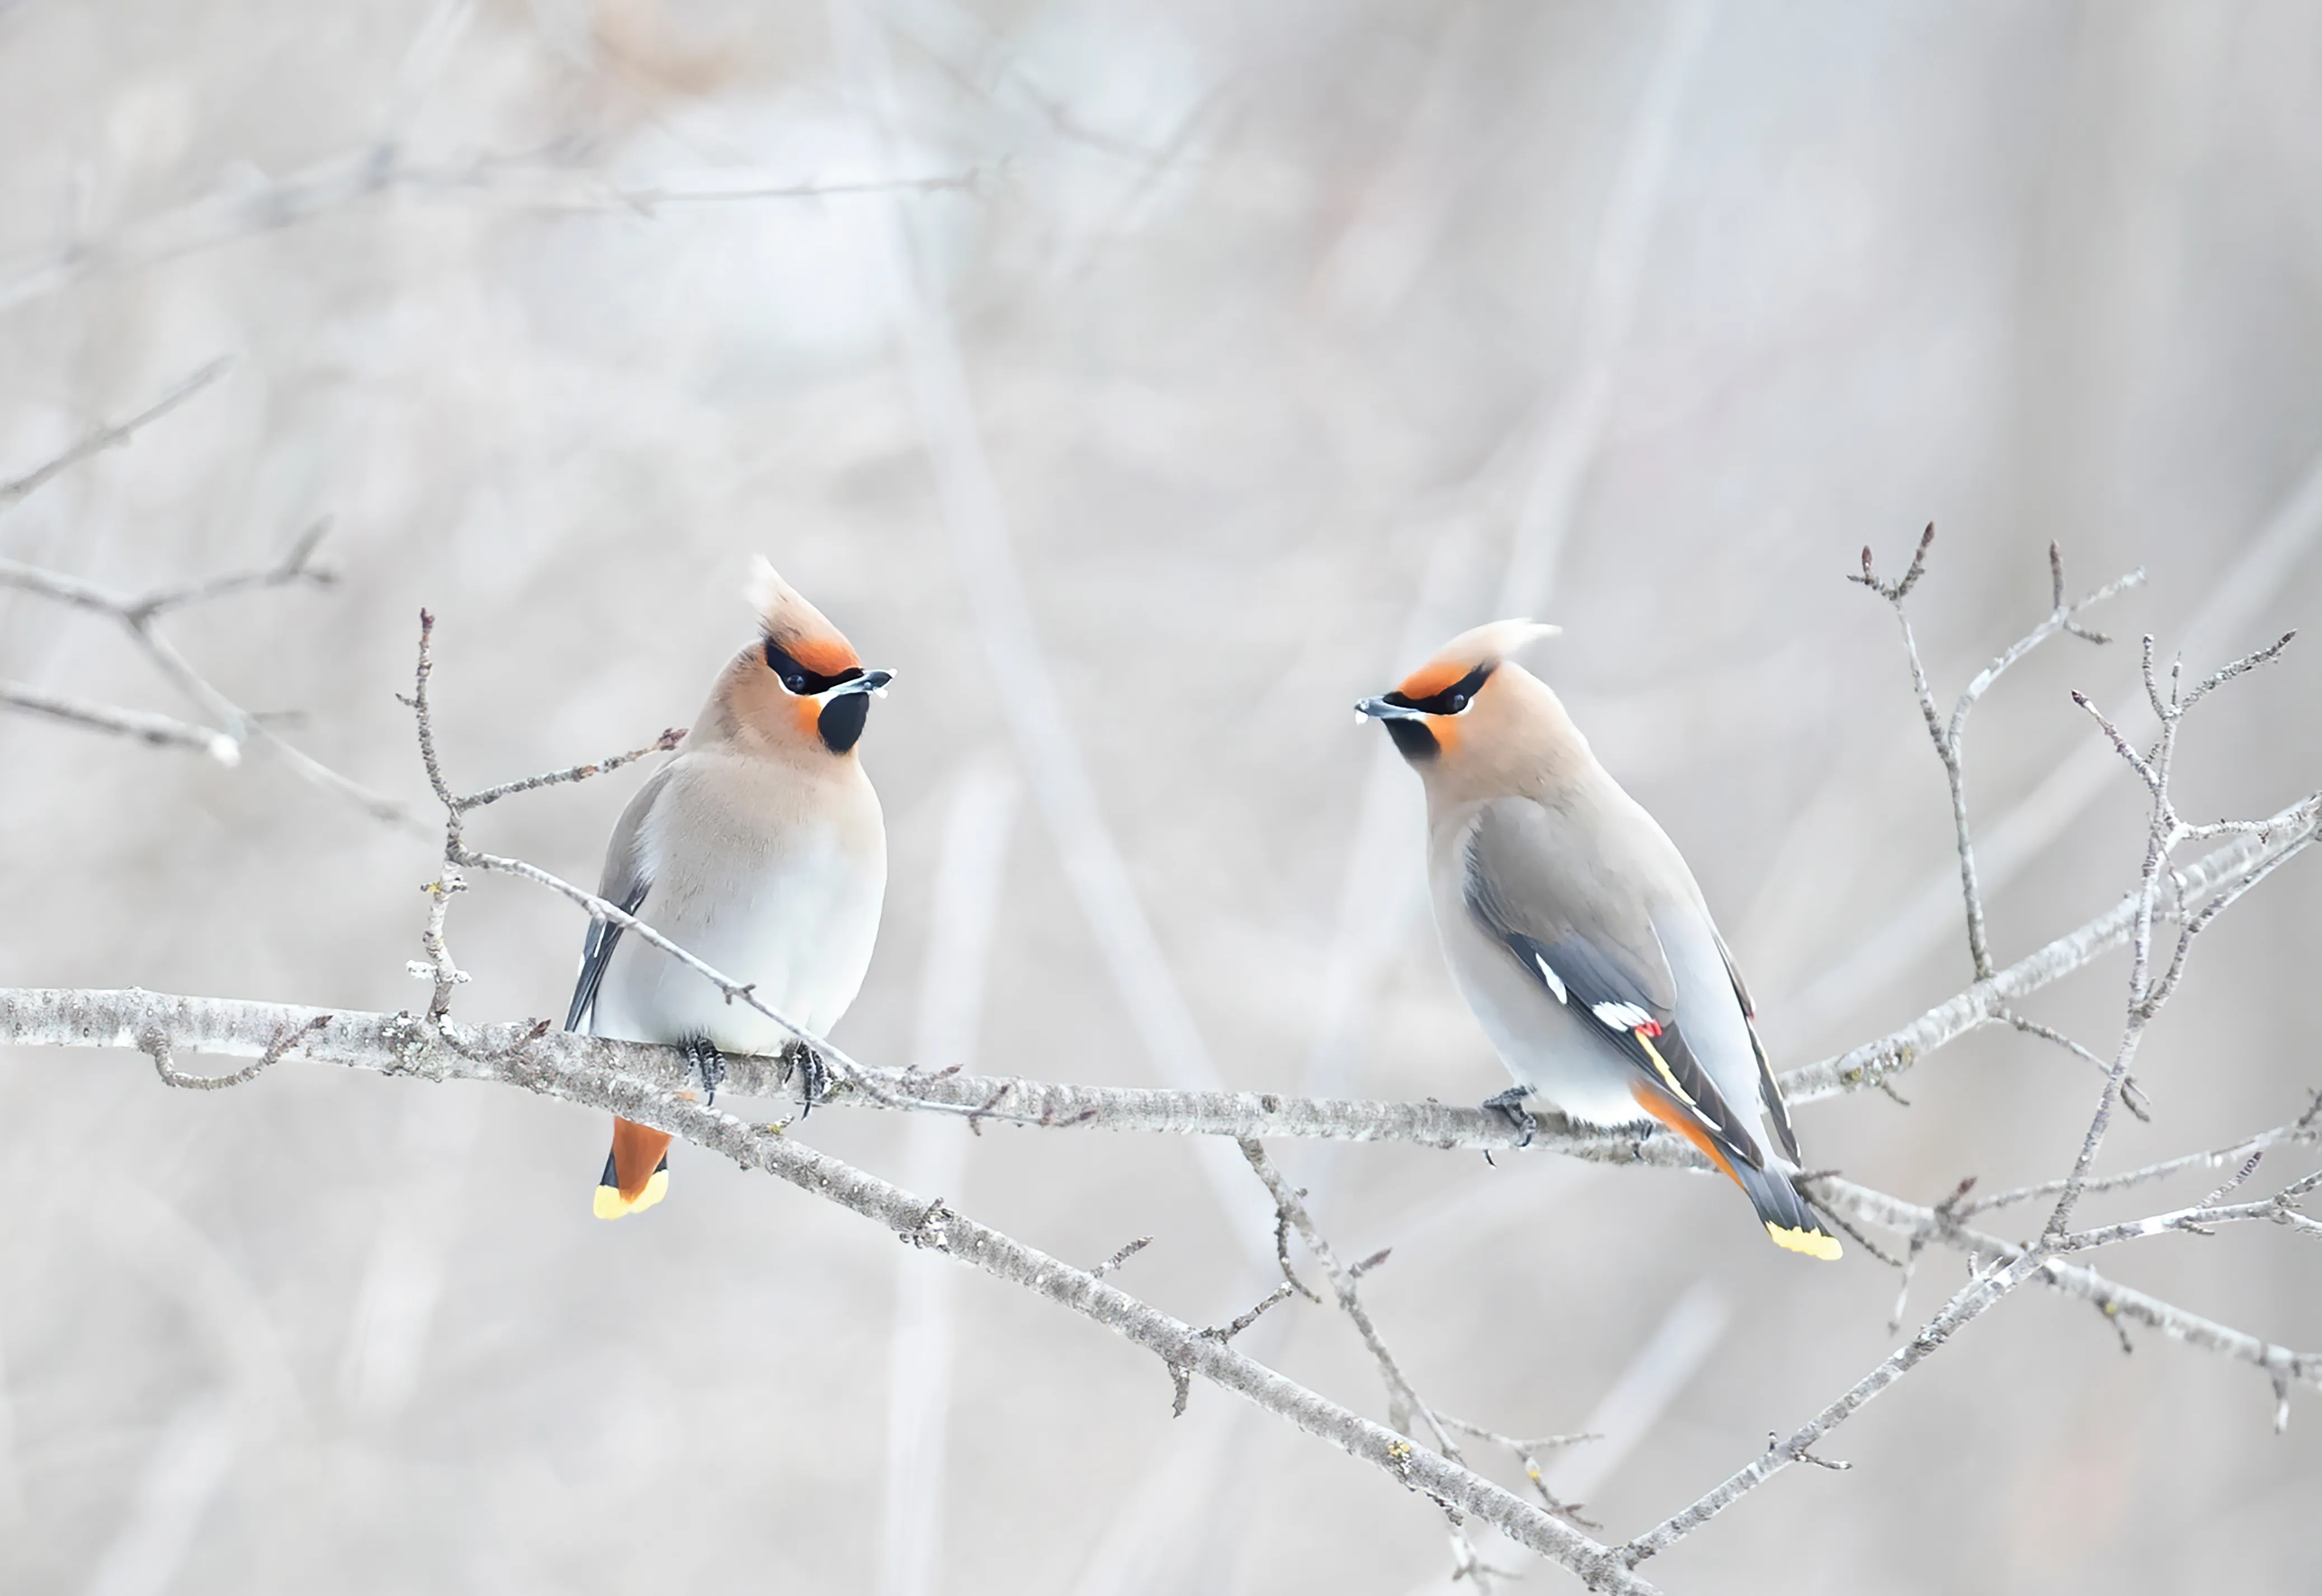 A pair of Waxwings perched on a snow frosted branch.